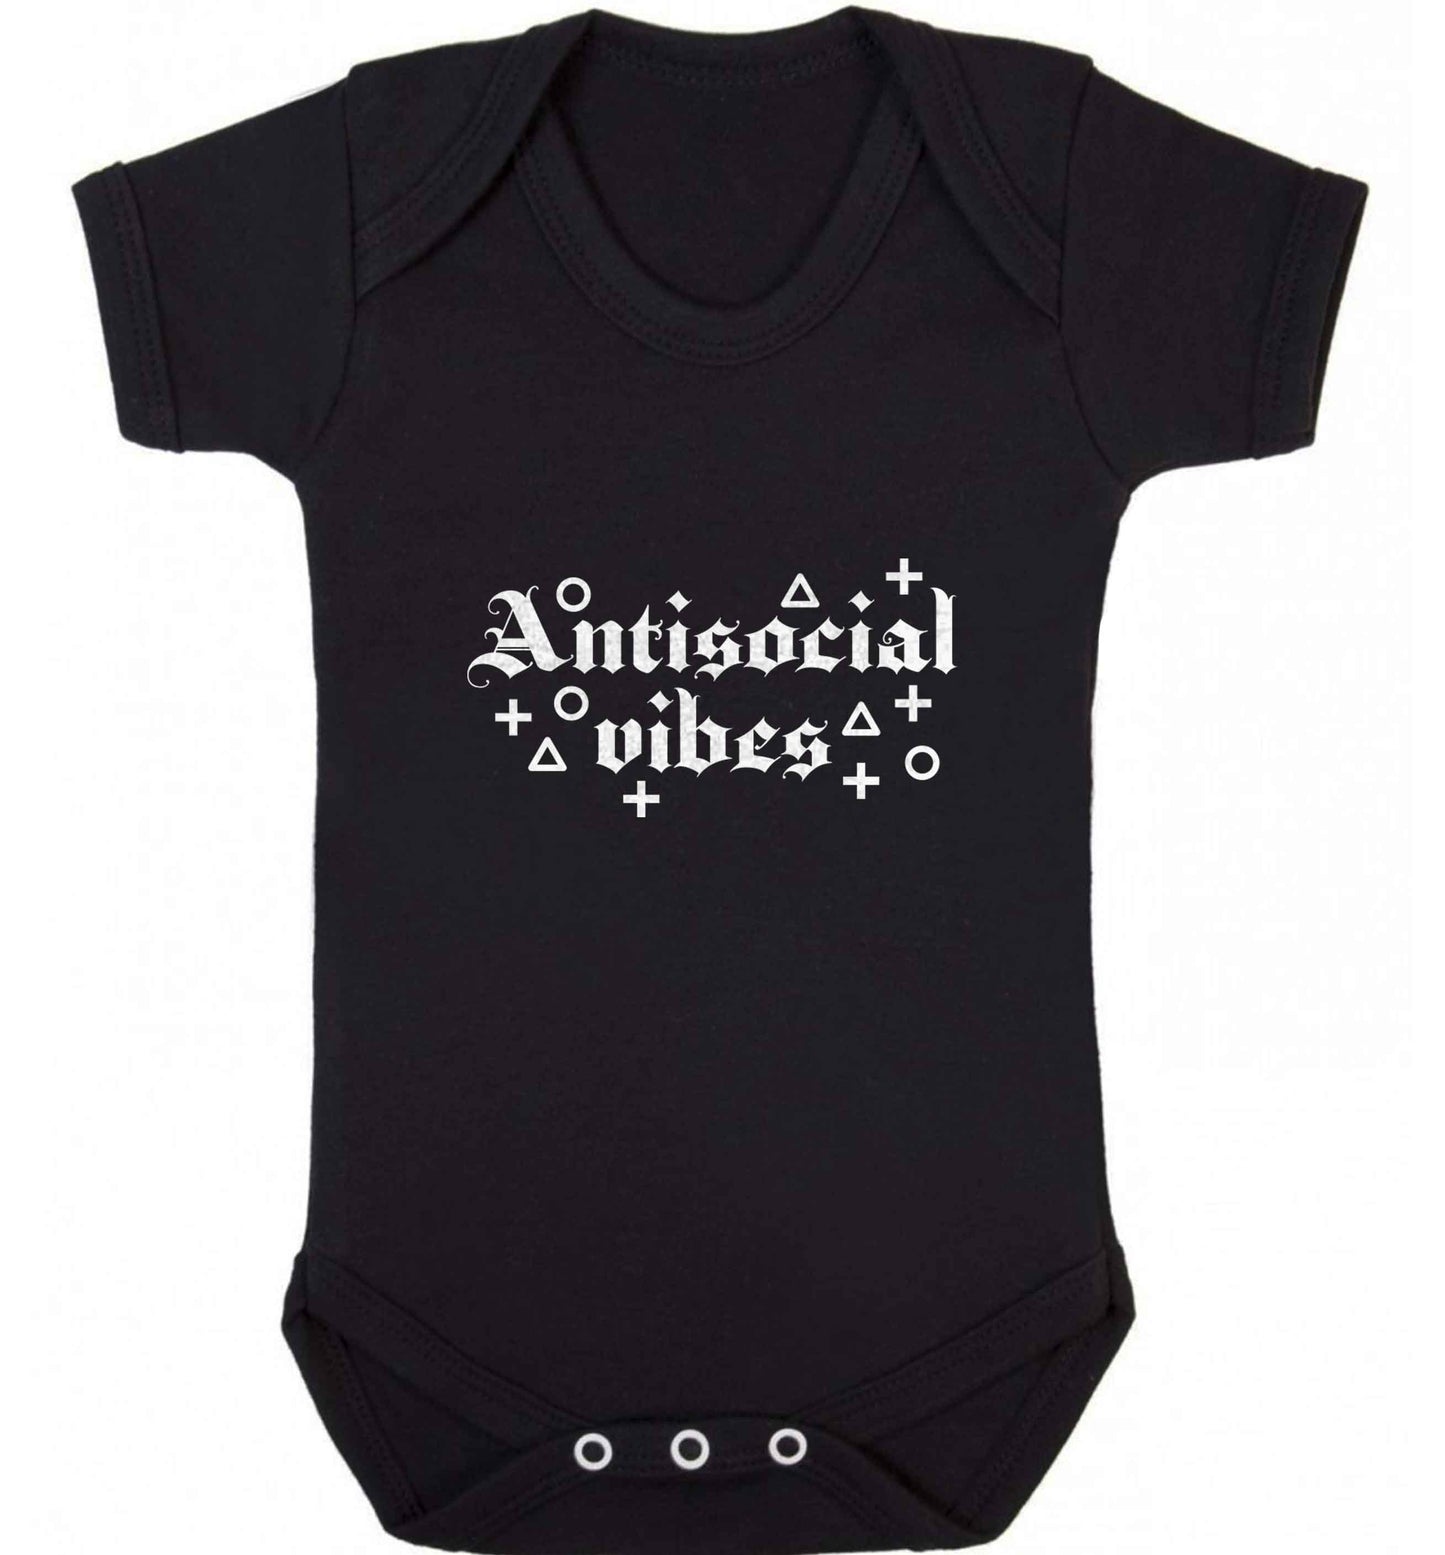 Antisocial vibes baby vest black 18-24 months